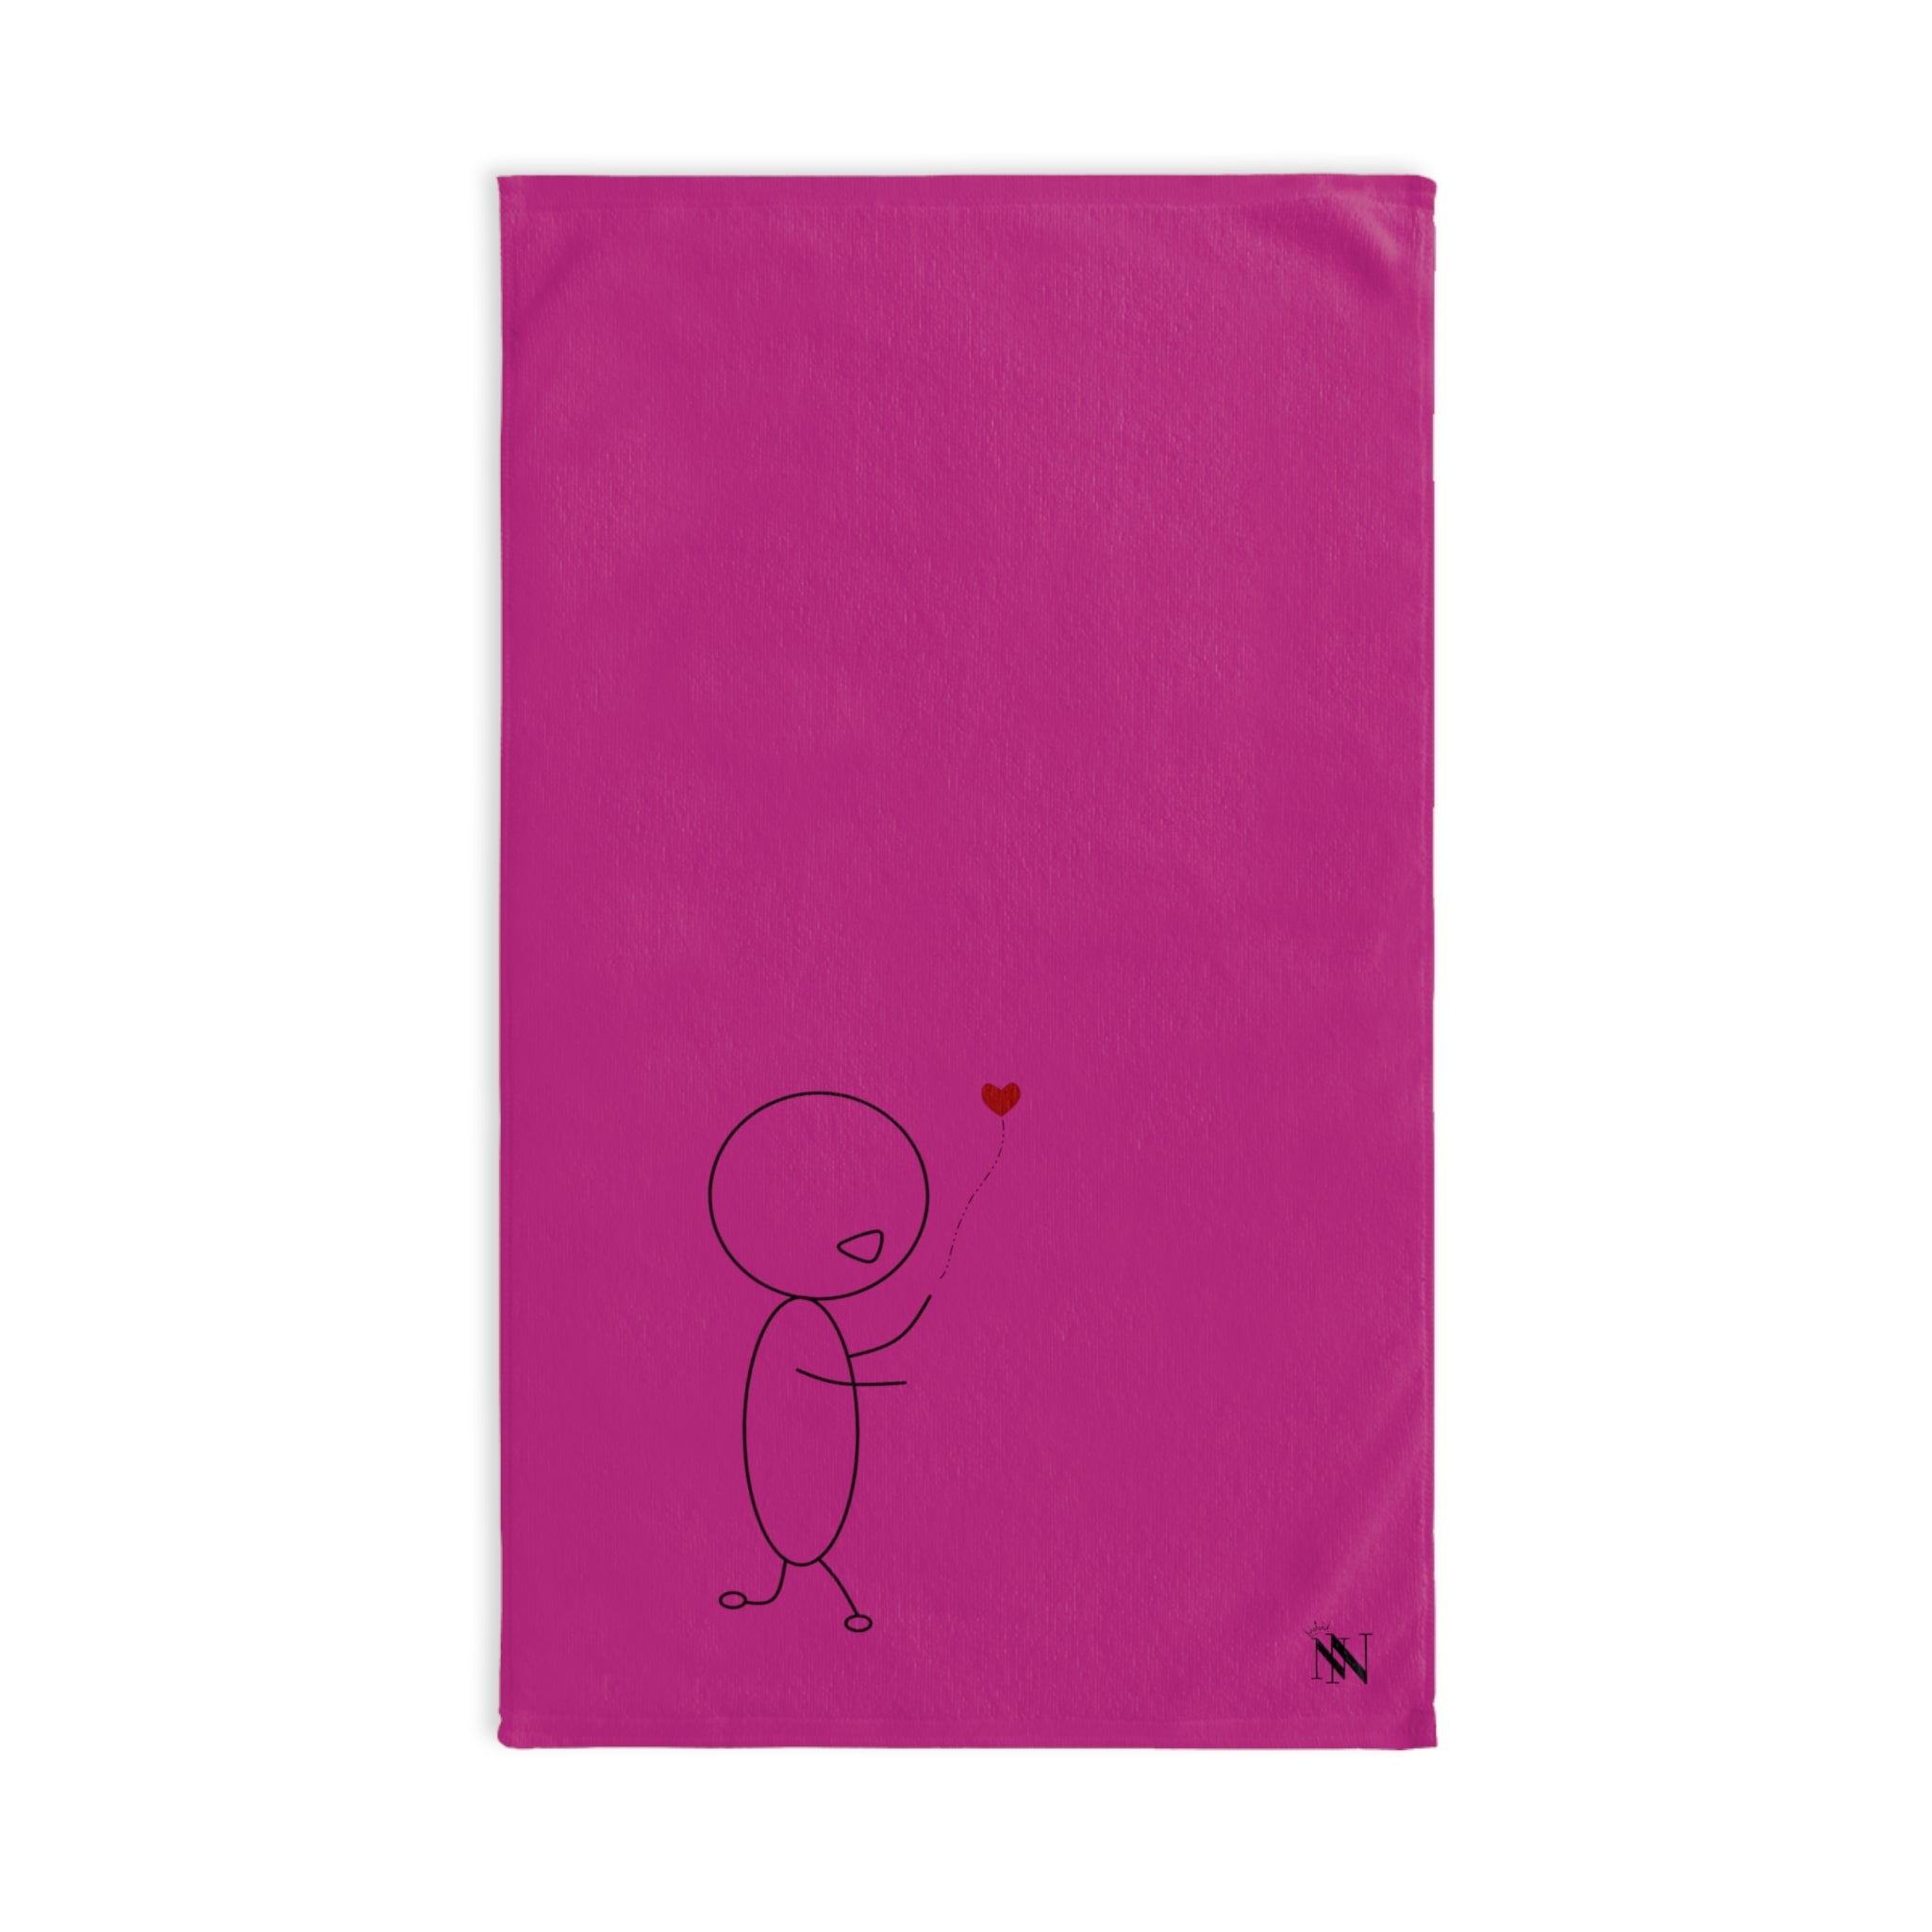 Stick Man Balloon Fuscia | Funny Gifts for Men - Gifts for Him - Birthday Gifts for Men, Him, Husband, Boyfriend, New Couple Gifts, Fathers & Valentines Day Gifts, Hand Towels NECTAR NAPKINS